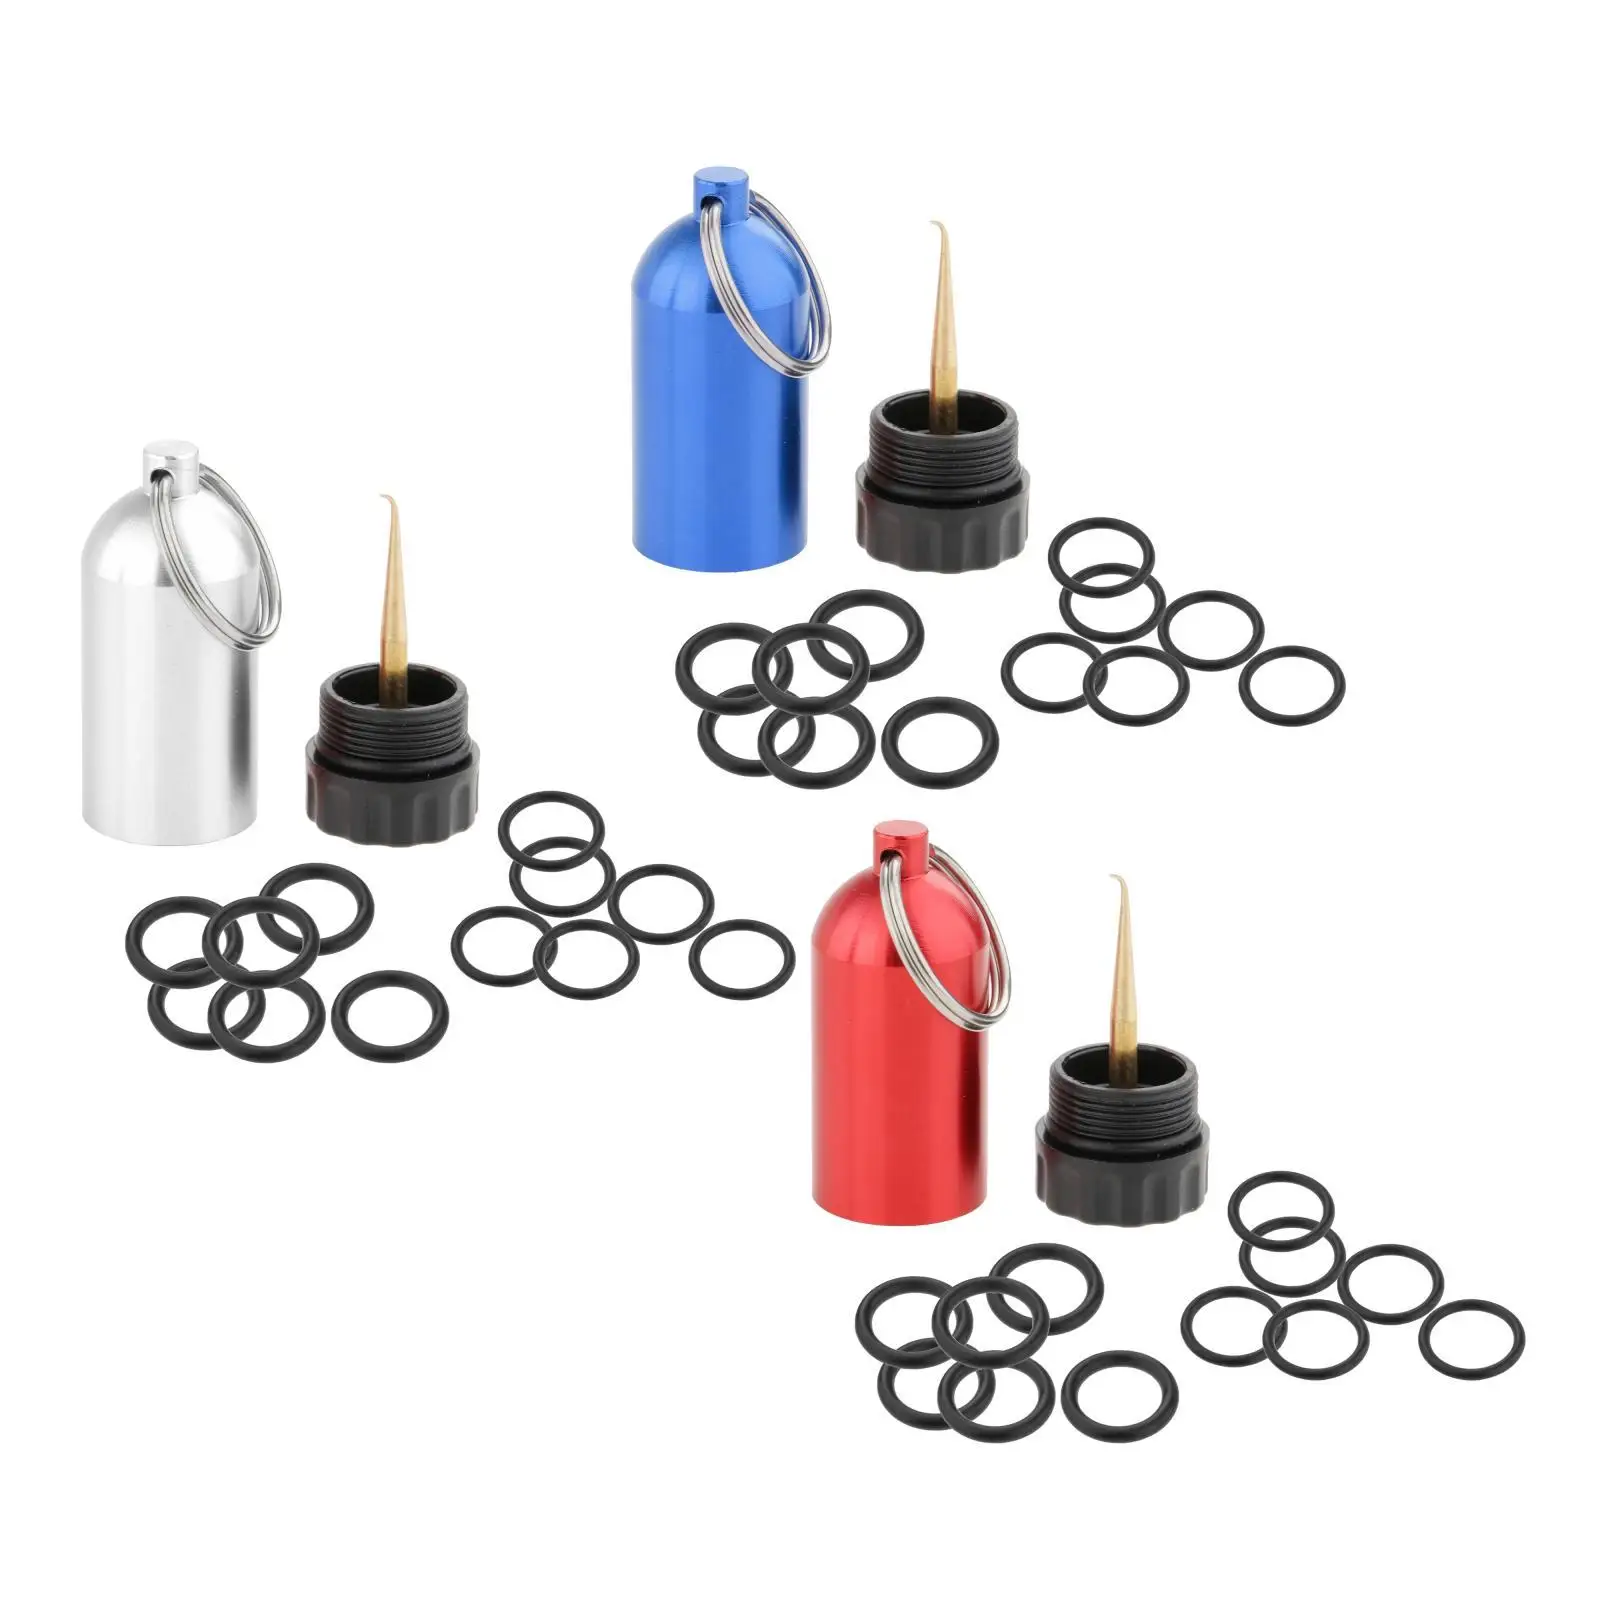 Mini Scuba Diving Tank, Cylinder Storage Bottle with 12 O-Rings Key Chain Dive Aluminum Alloy Repair